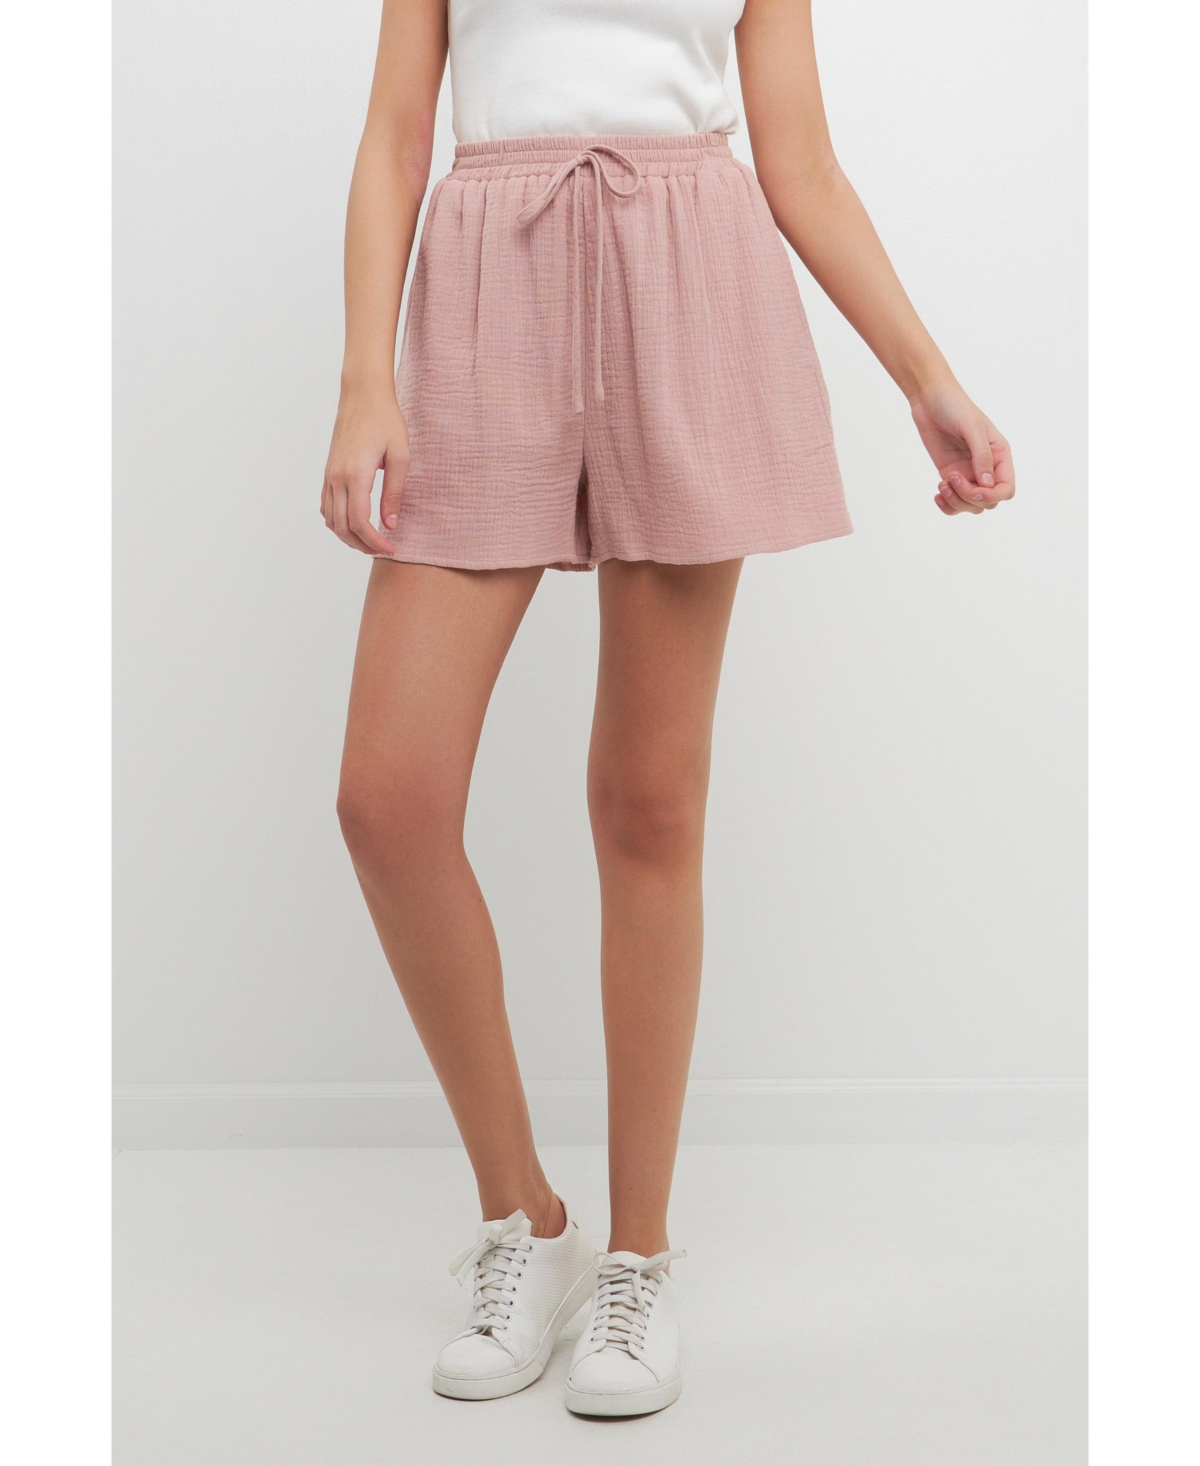 Women's Gauze Shorts With Thick Elastic Band And Pockets - Dusty pink